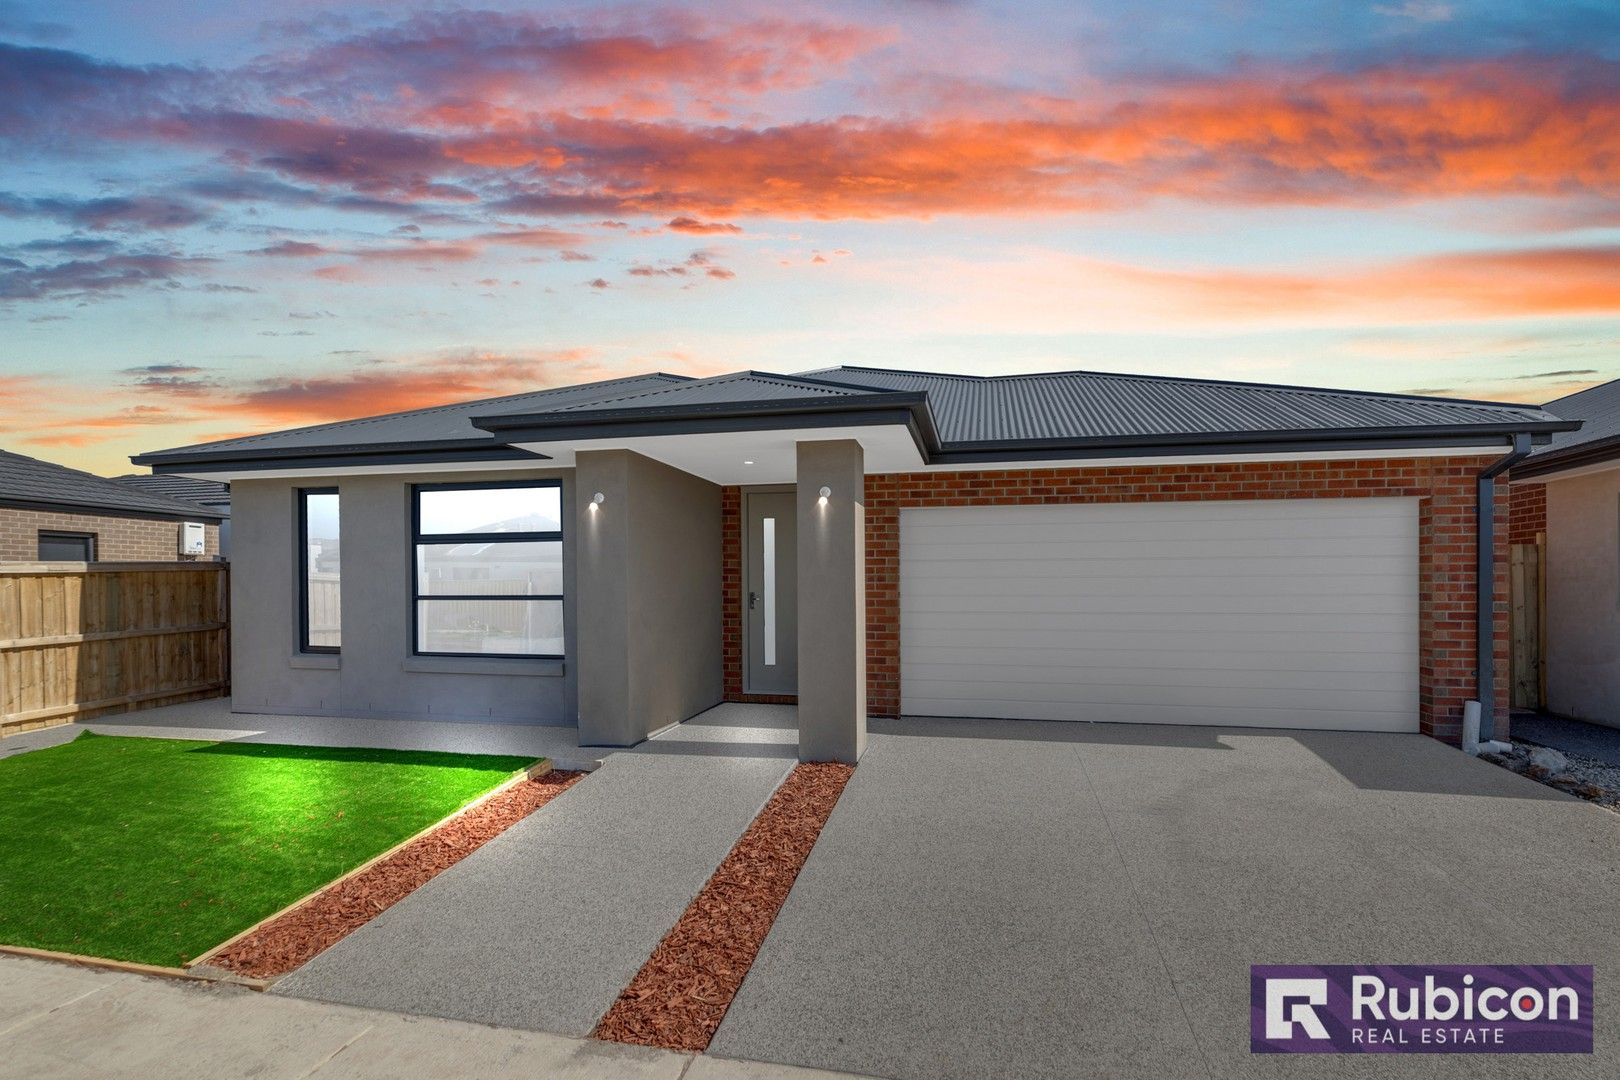 4 bedrooms House in 20 HUFFNELL ROAD DEANSIDE VIC, 3336